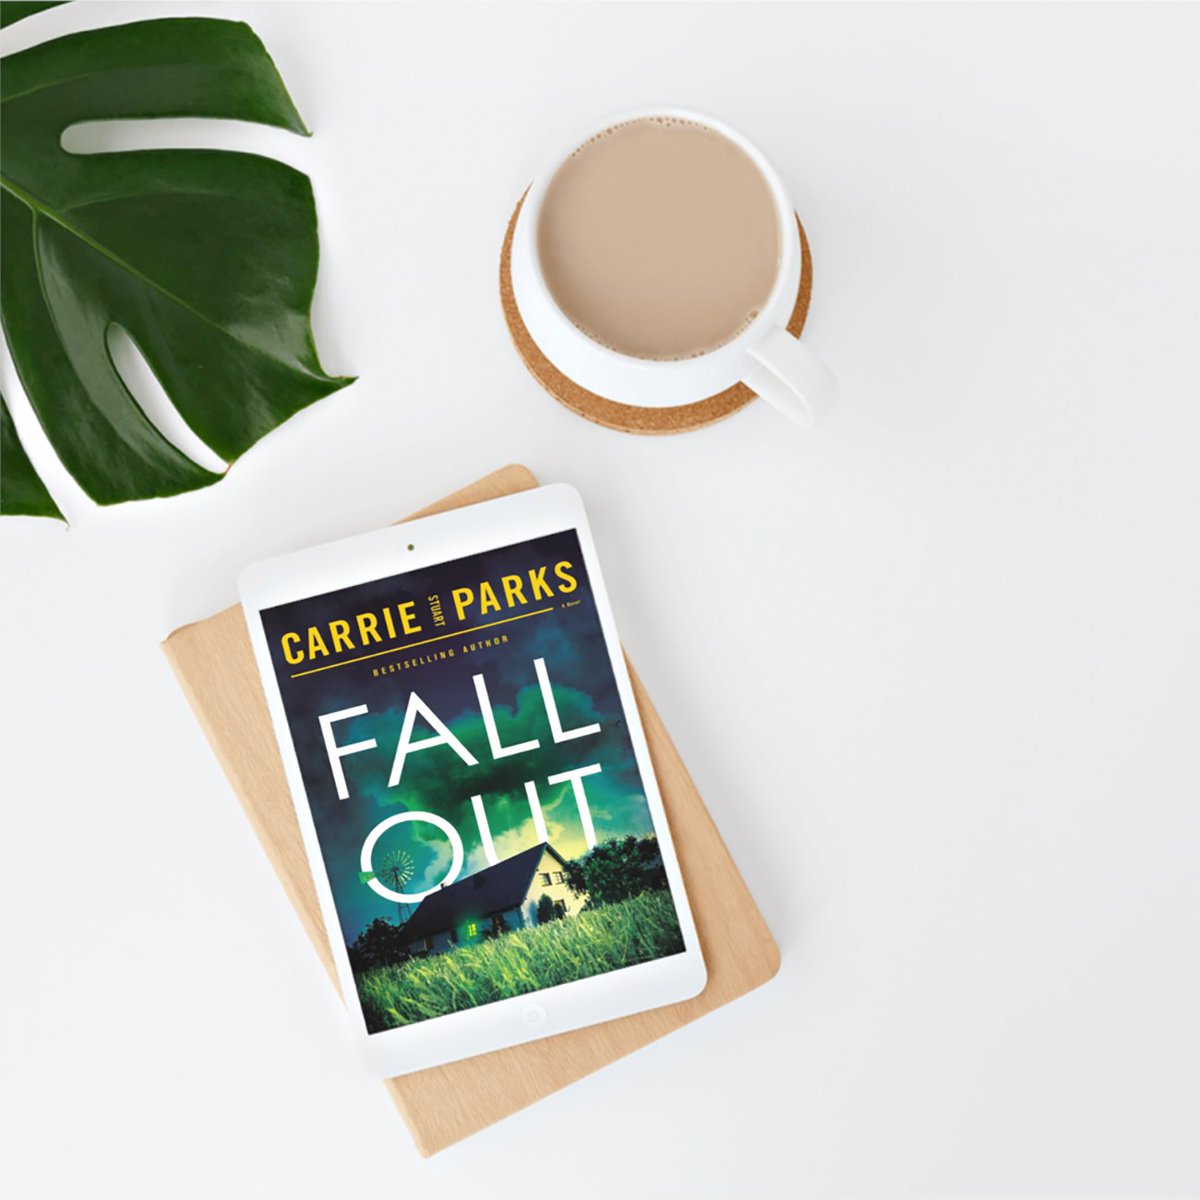 Fallout by #CarrieStuartParks 'had that edgy dark vibe. Danger, risks, #suspense, and #mystery all perfectly woven into an epic adventure. Plenty of #action and danger to keep my heart racing.' ~ @urbanliterary bit.ly/3Wtvj83 #book bookstoread #whattoreadnext